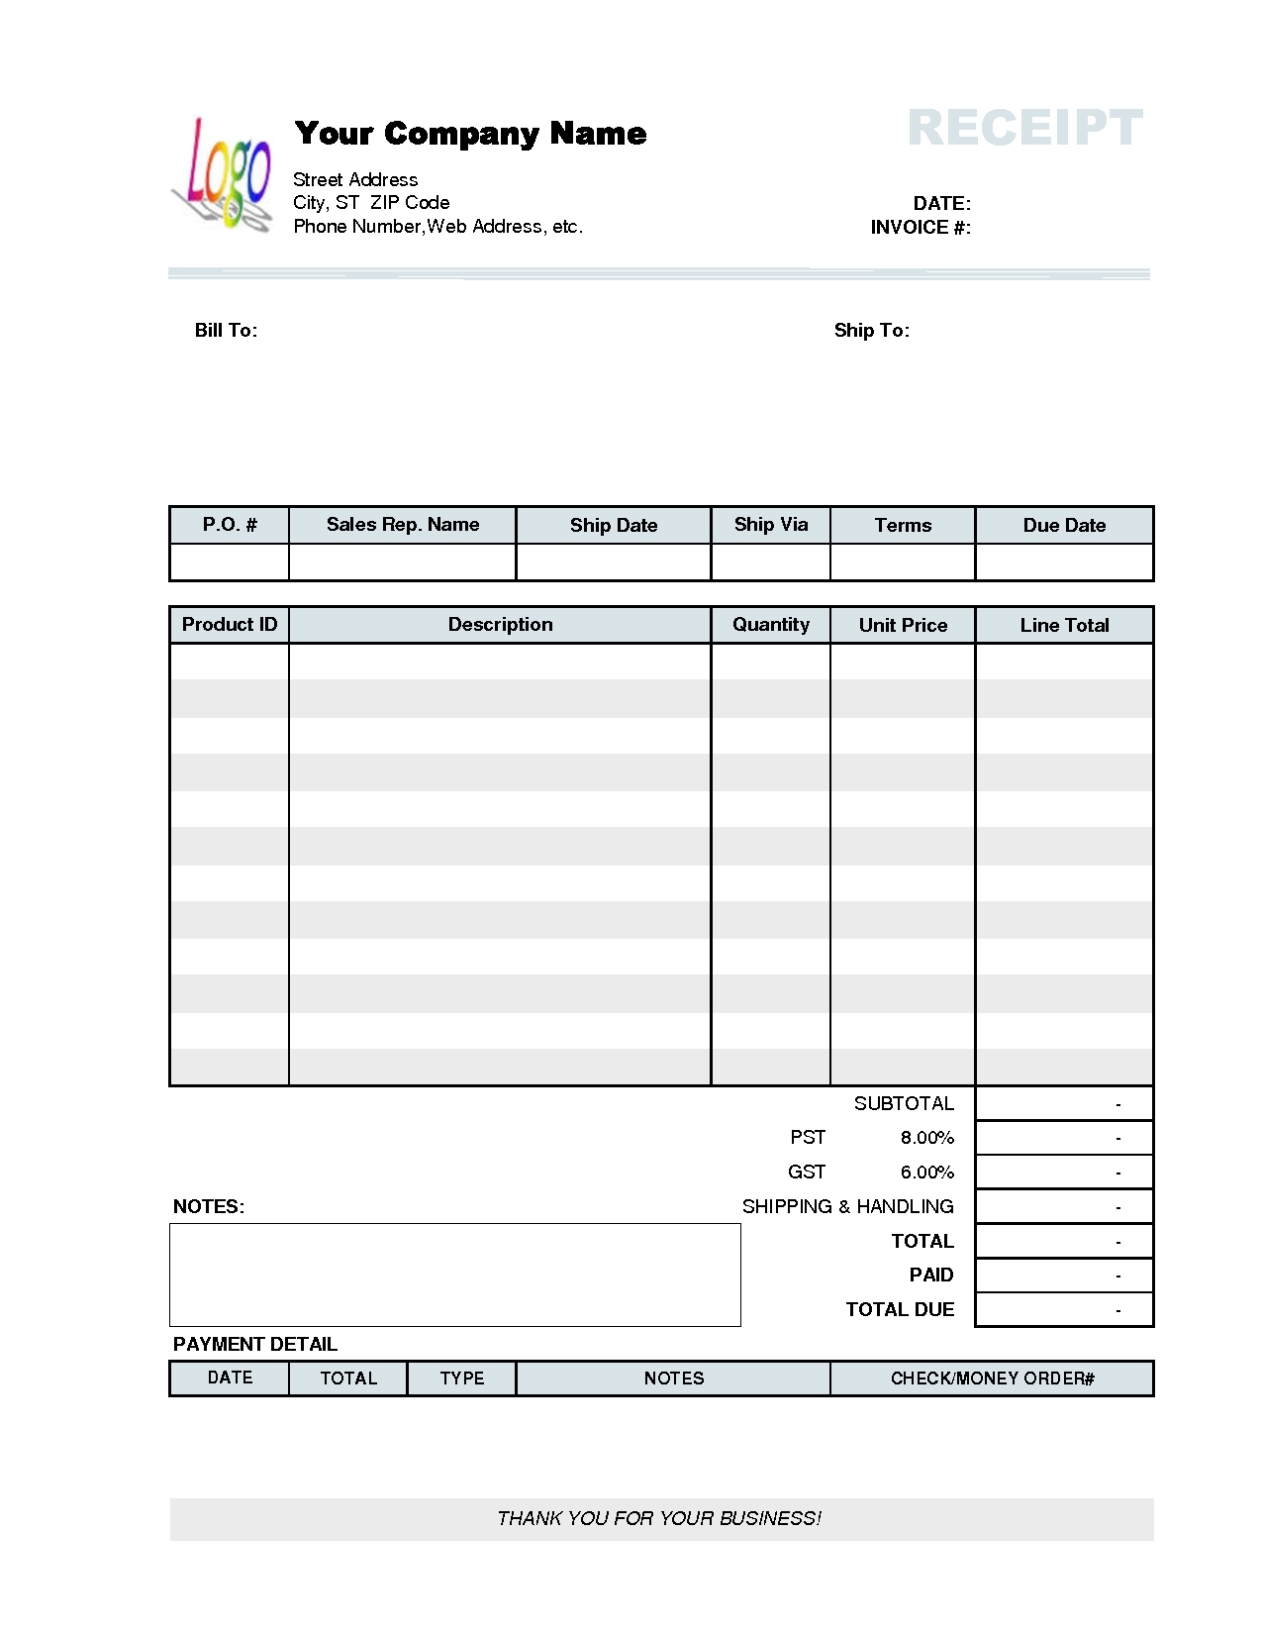 Receipt Invoice Template | Invoice Example Intended For Free Bill Invoice Template Printable